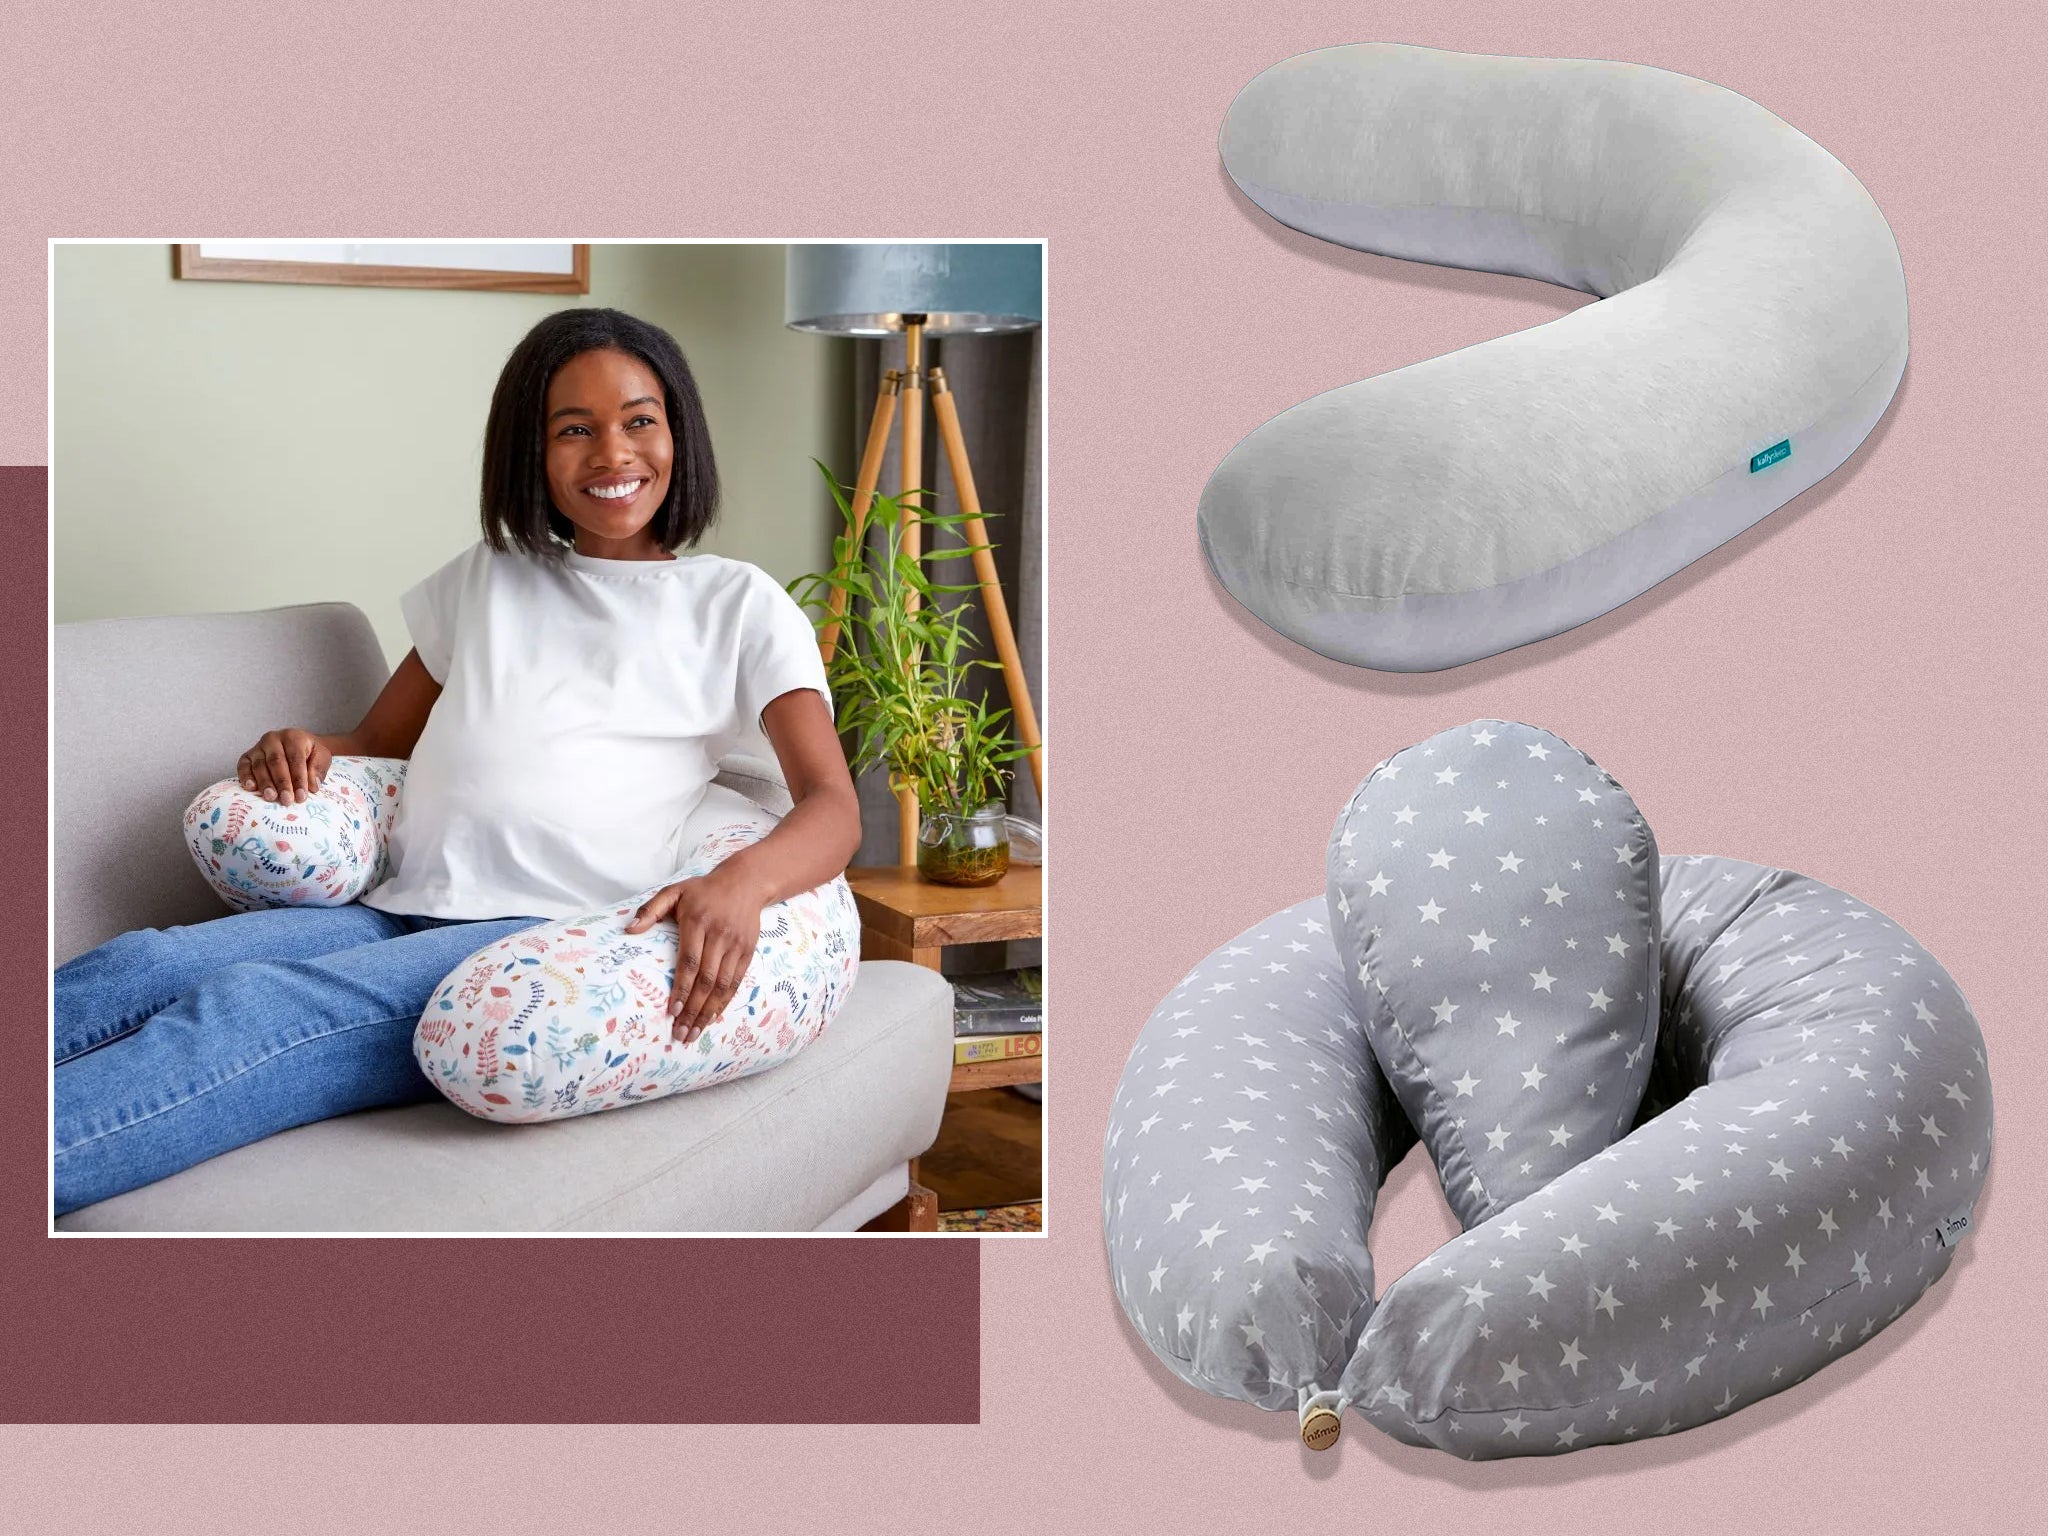 https://static.independent.co.uk/2023/05/24/16/pregnancy%20pillows%20indybest%20copy.jpg